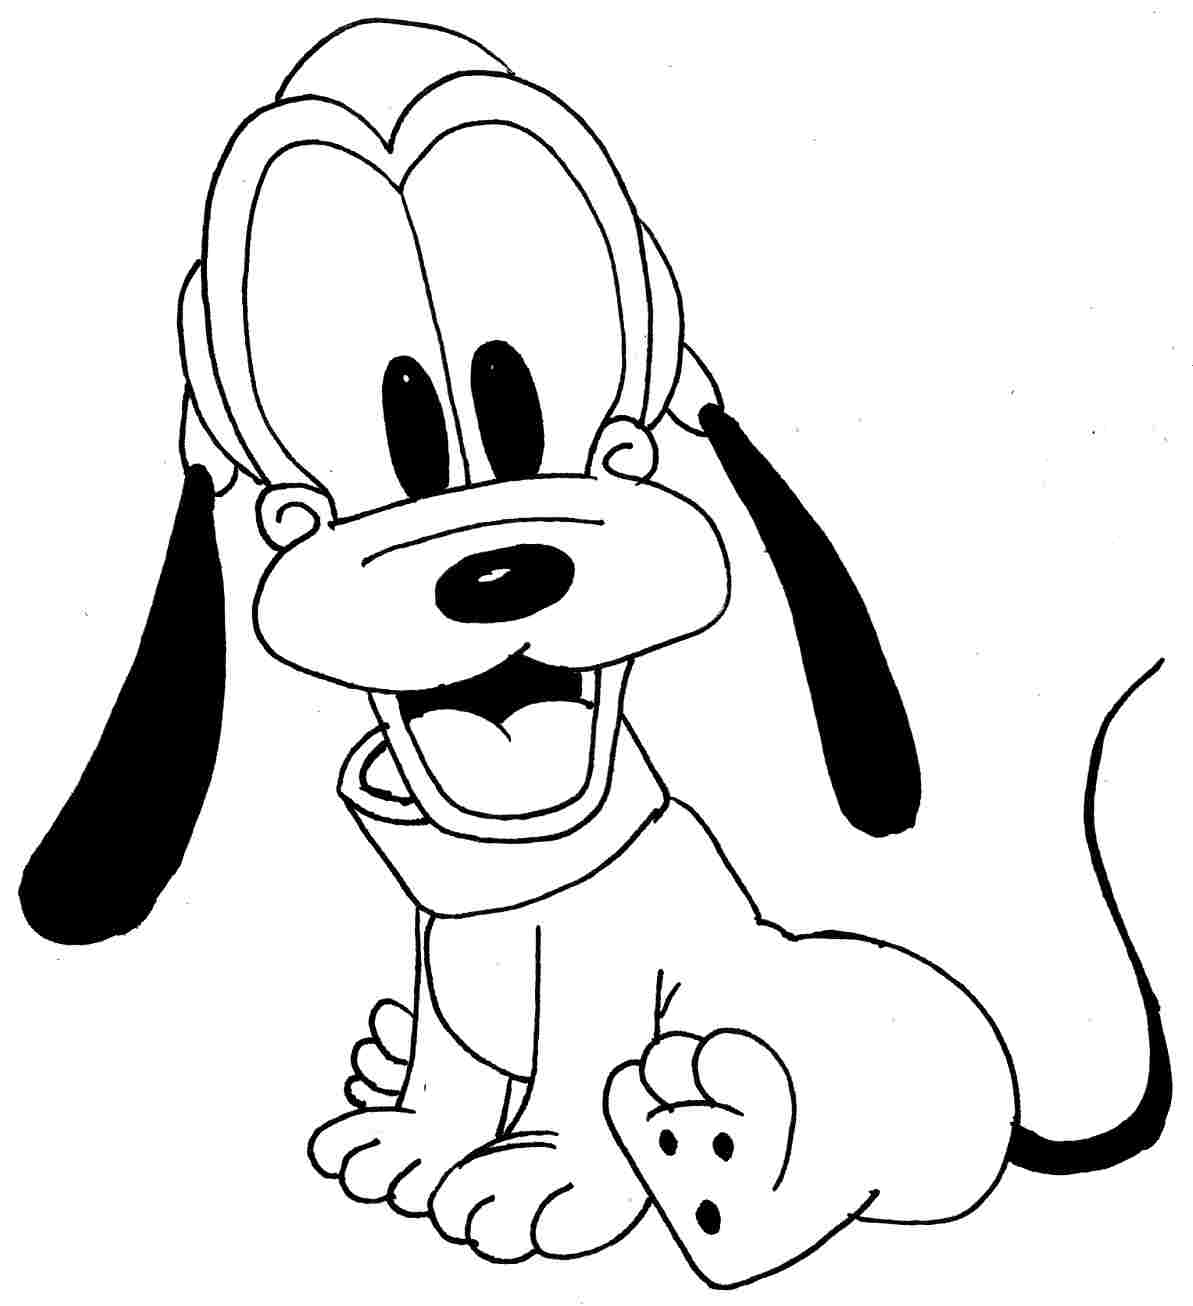 Cute Baby Cartoon - Coloring Pages for Kids and for Adults